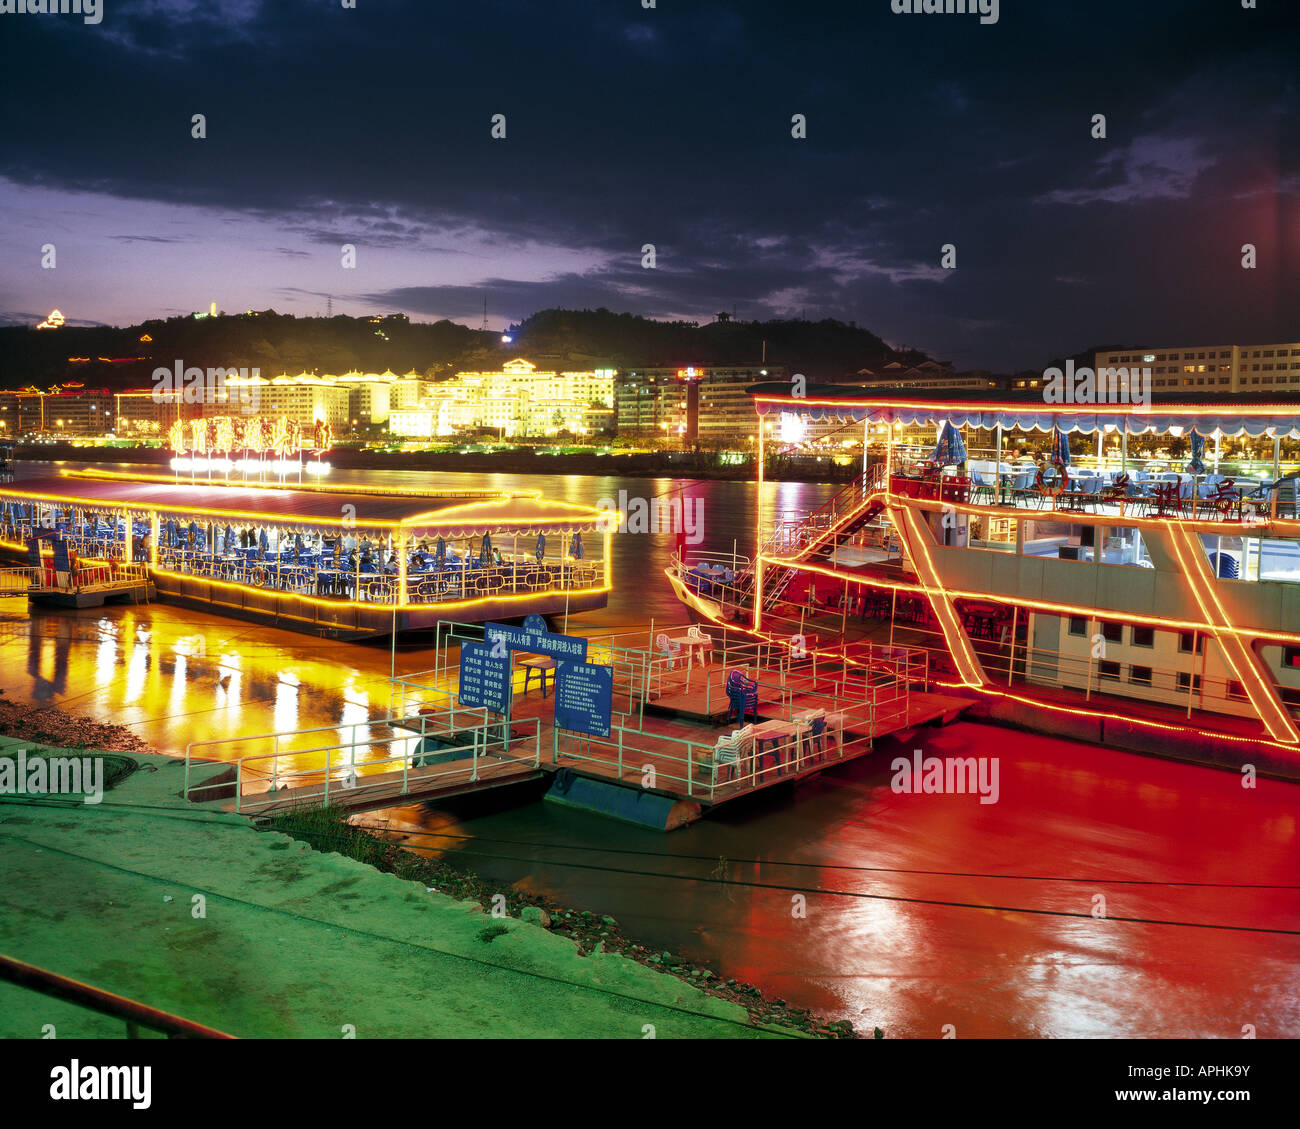 Riverboat restaurant on the Yellow River at Lanzhou, China. Stock Photo